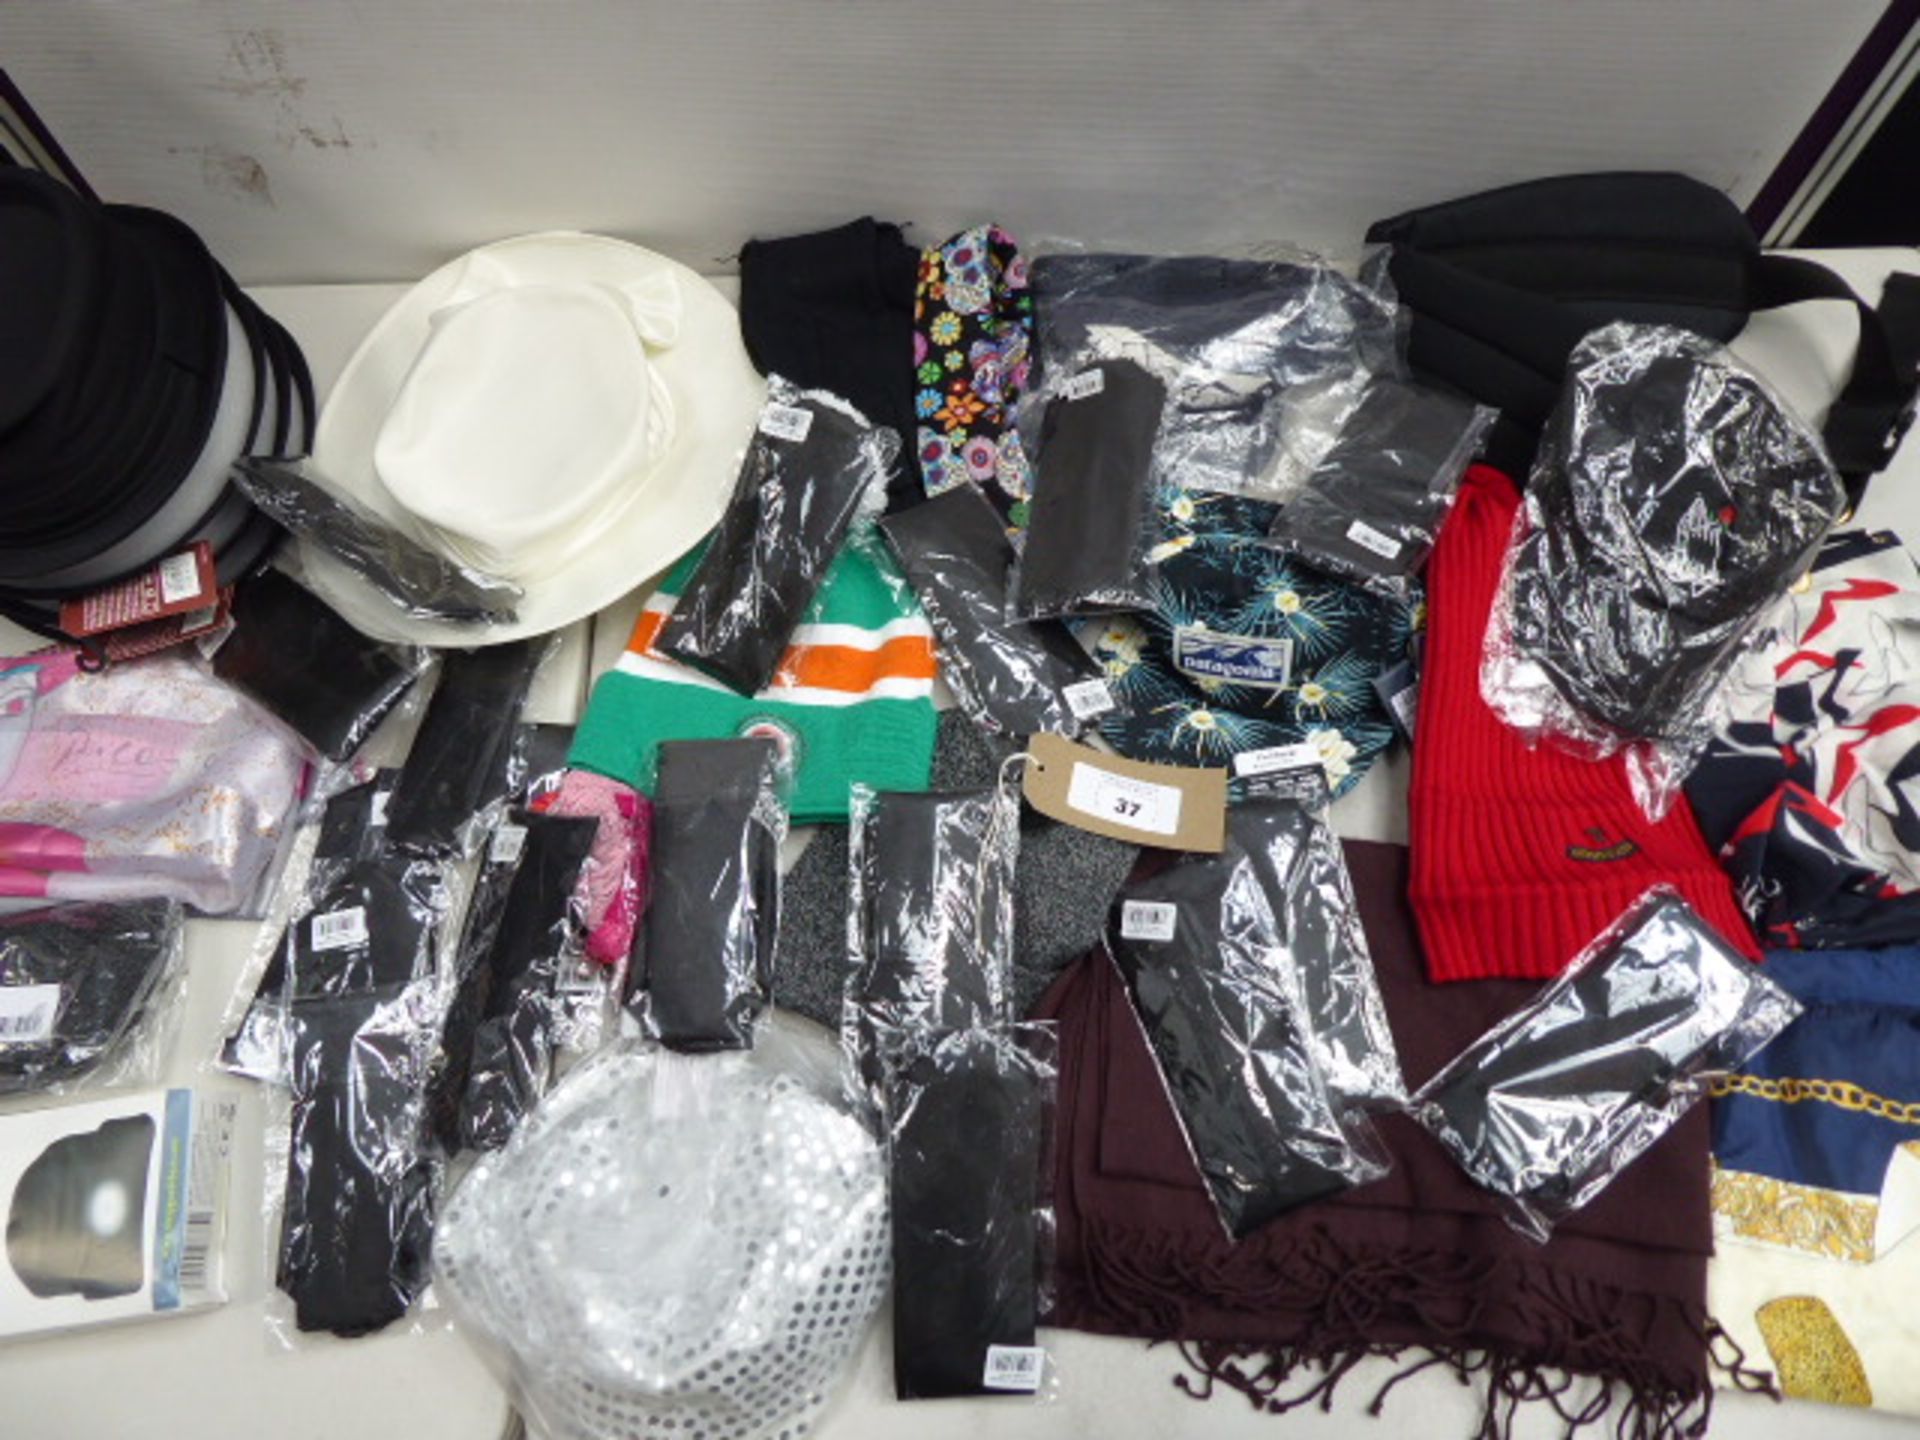 Quantity of accessories including hats, scarves, gloves and belts